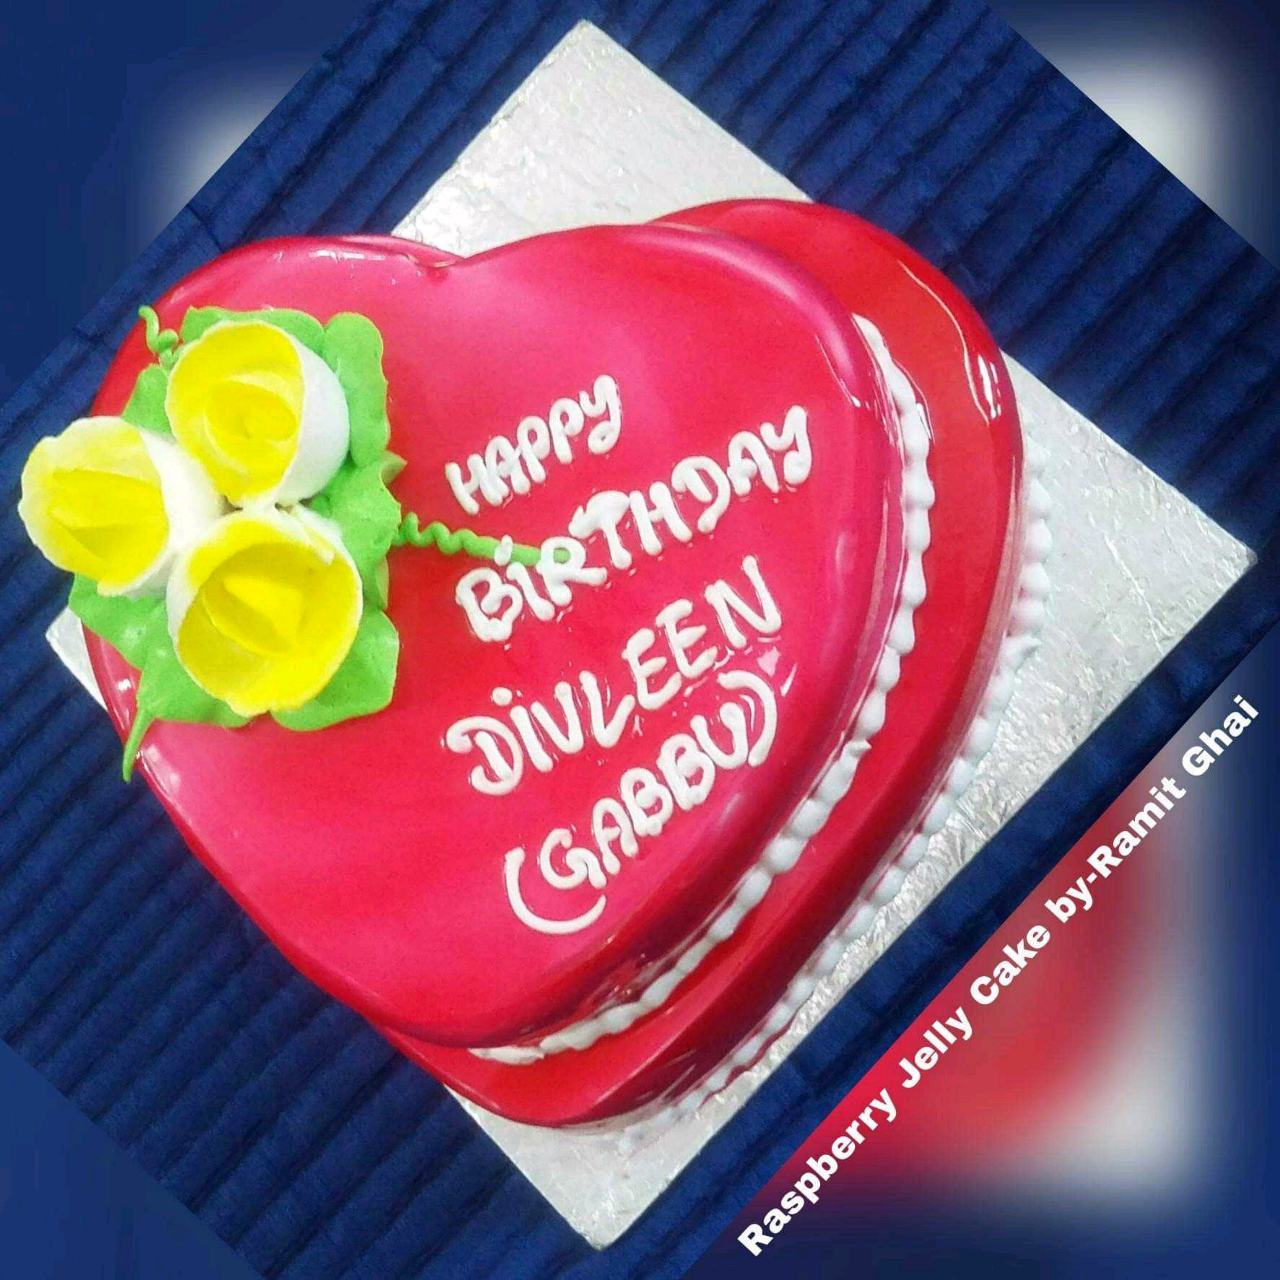 Raspberry Jelly Cake....(A Cake Made By Me On The Occasion Of My Friends Birthday)